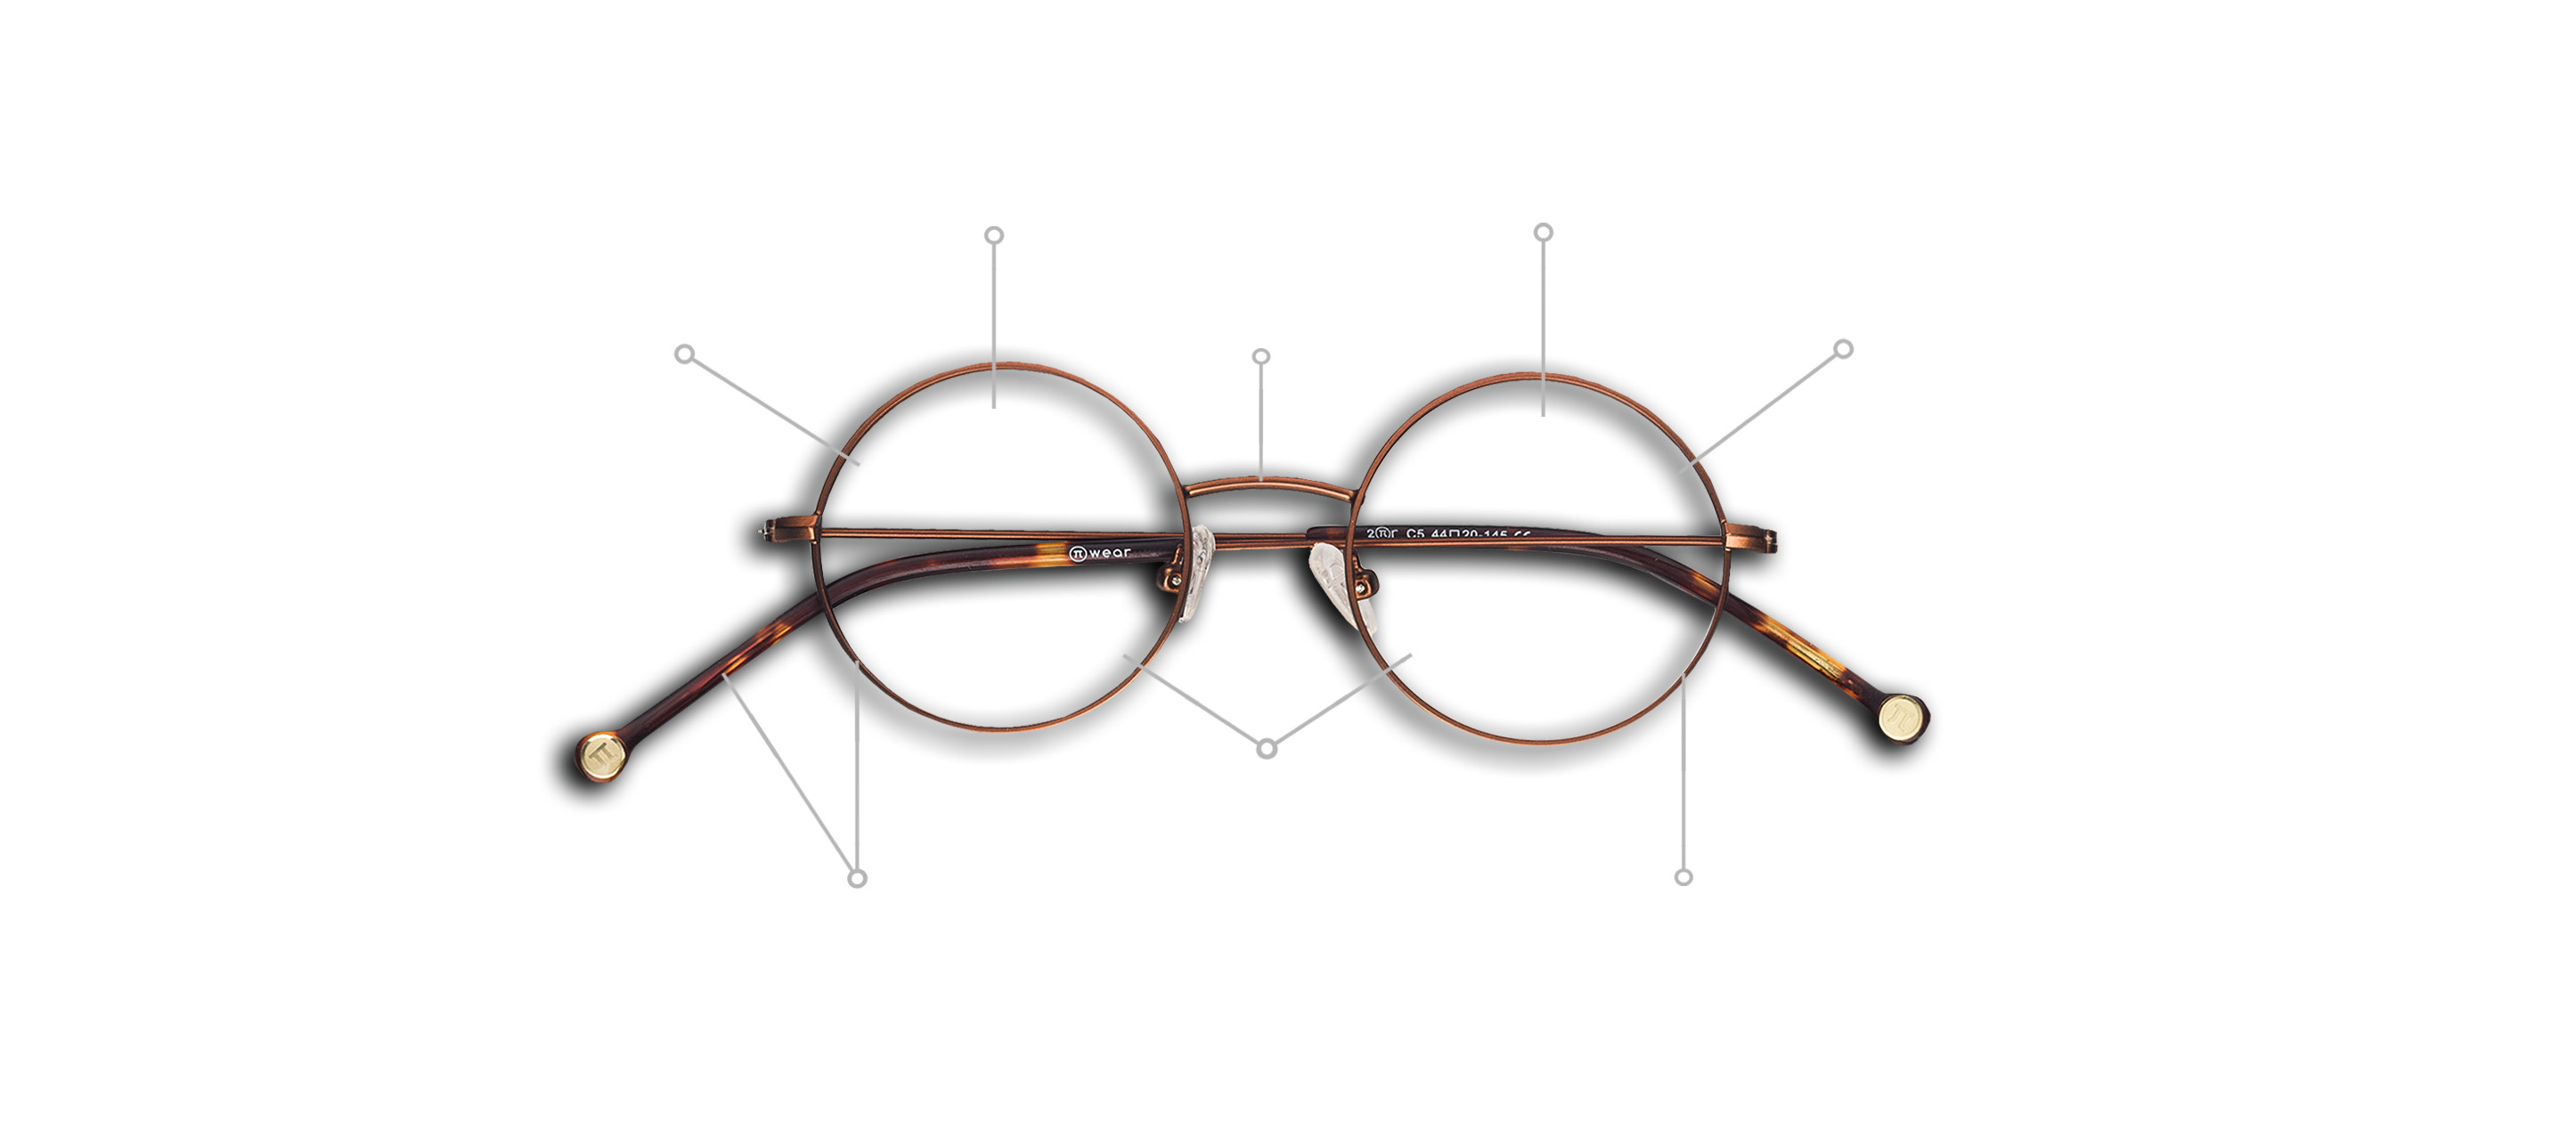 All Frames For $75 (Free Shipping)